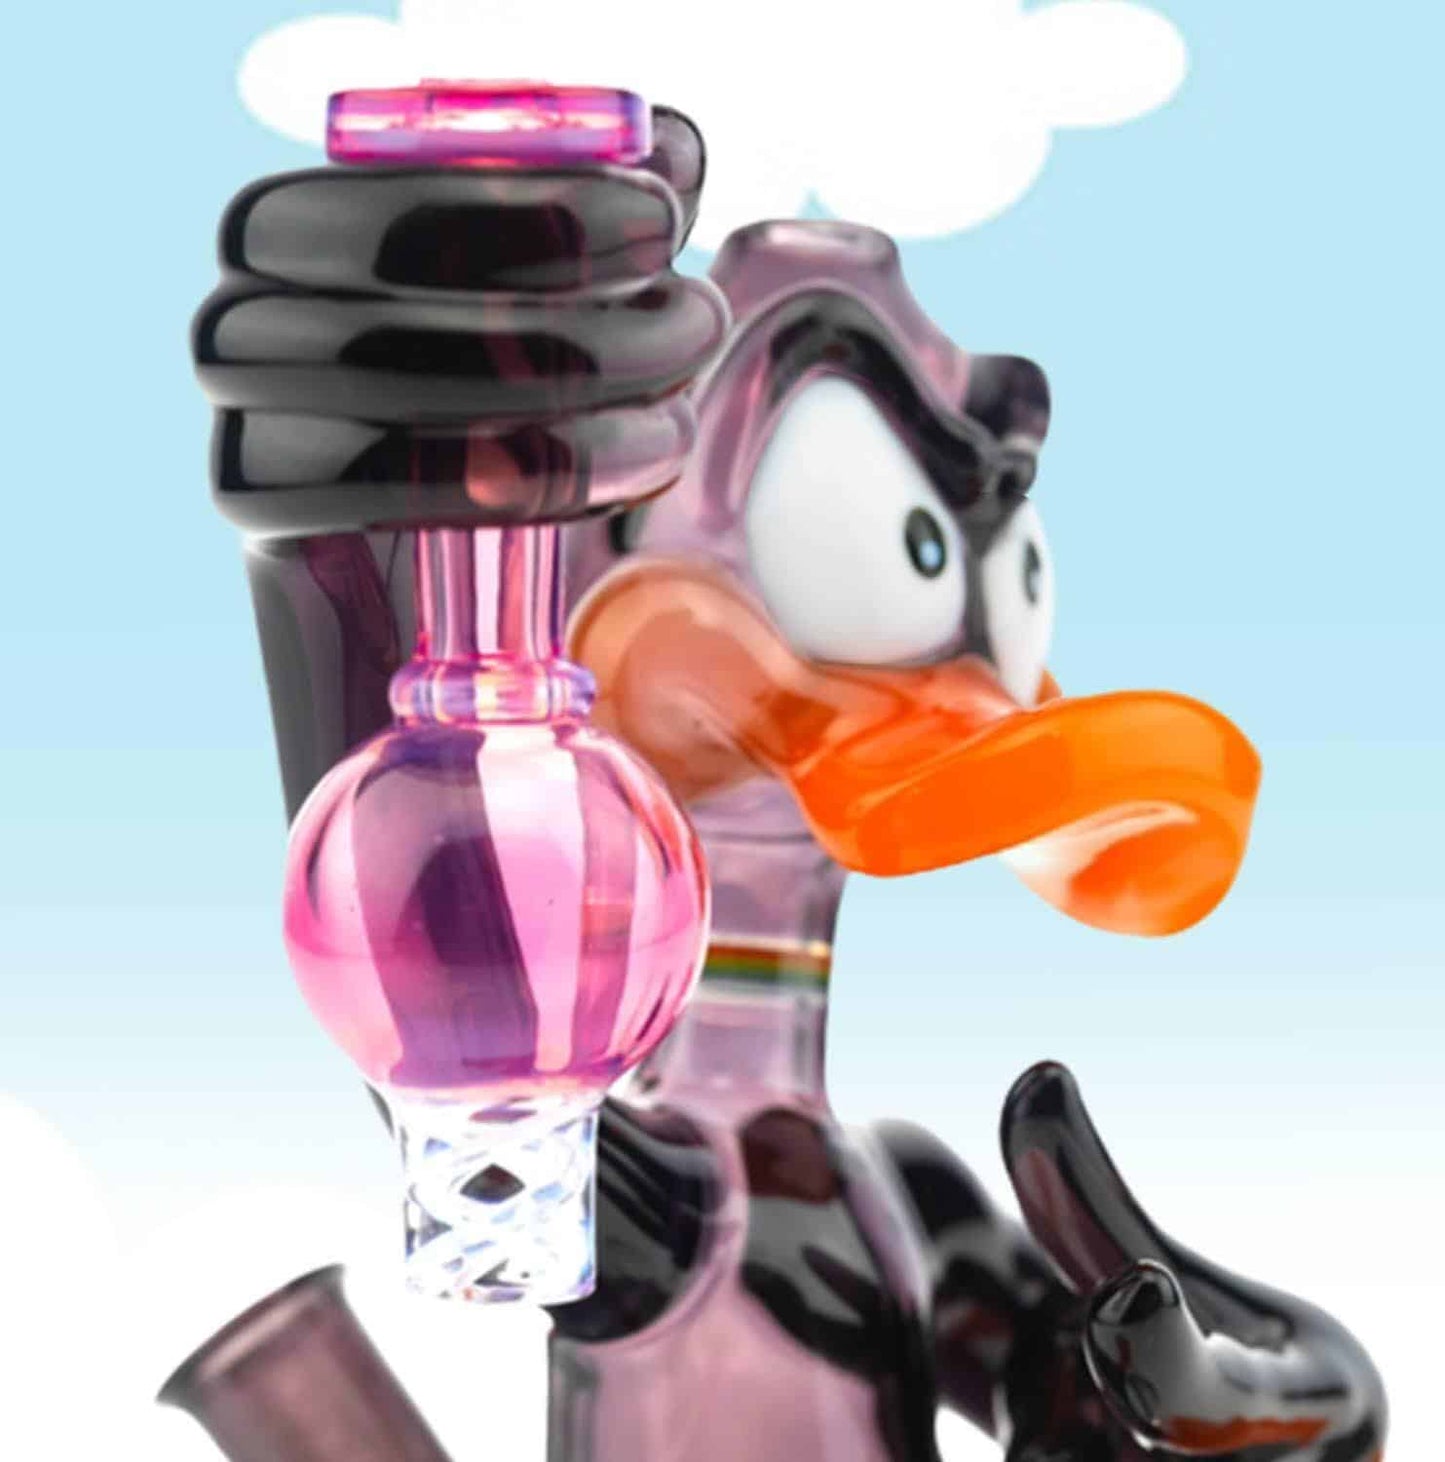 artisan-crafted design of the Dabby Duck Rig Set w/ Spinner Cap, Matching Dabby Cap/Pendant, and Dabber by JSmart Glass